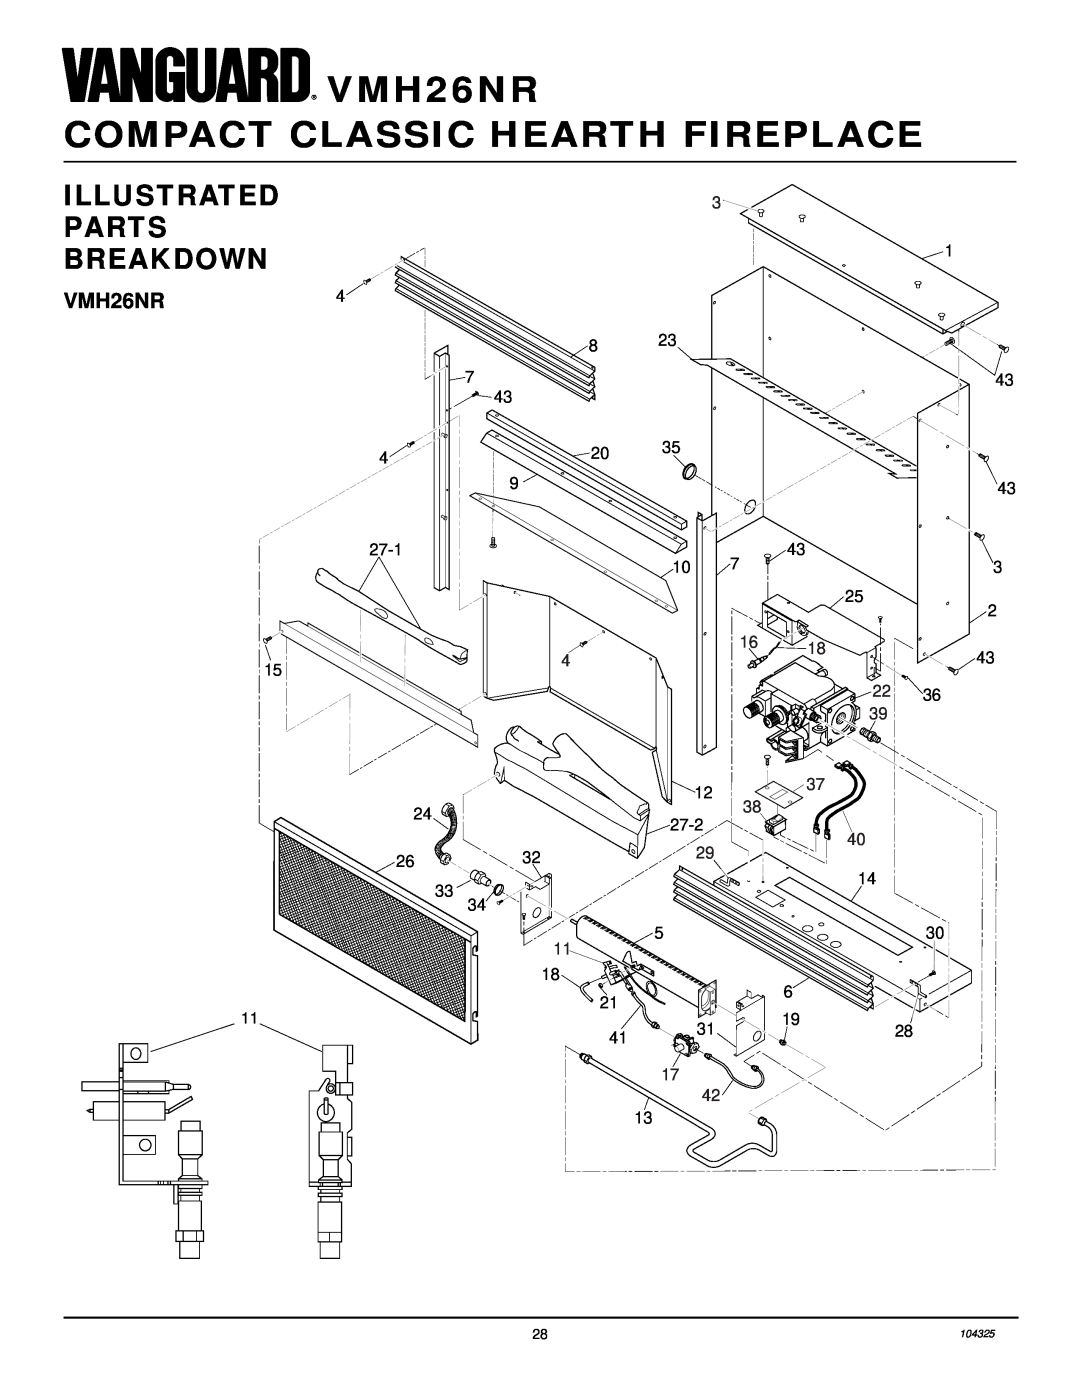 Vanguard Heating installation manual Illustrated Parts Breakdown, VMH26NR4, VMH26NR COMPACT CLASSIC HEARTH FIREPLACE 